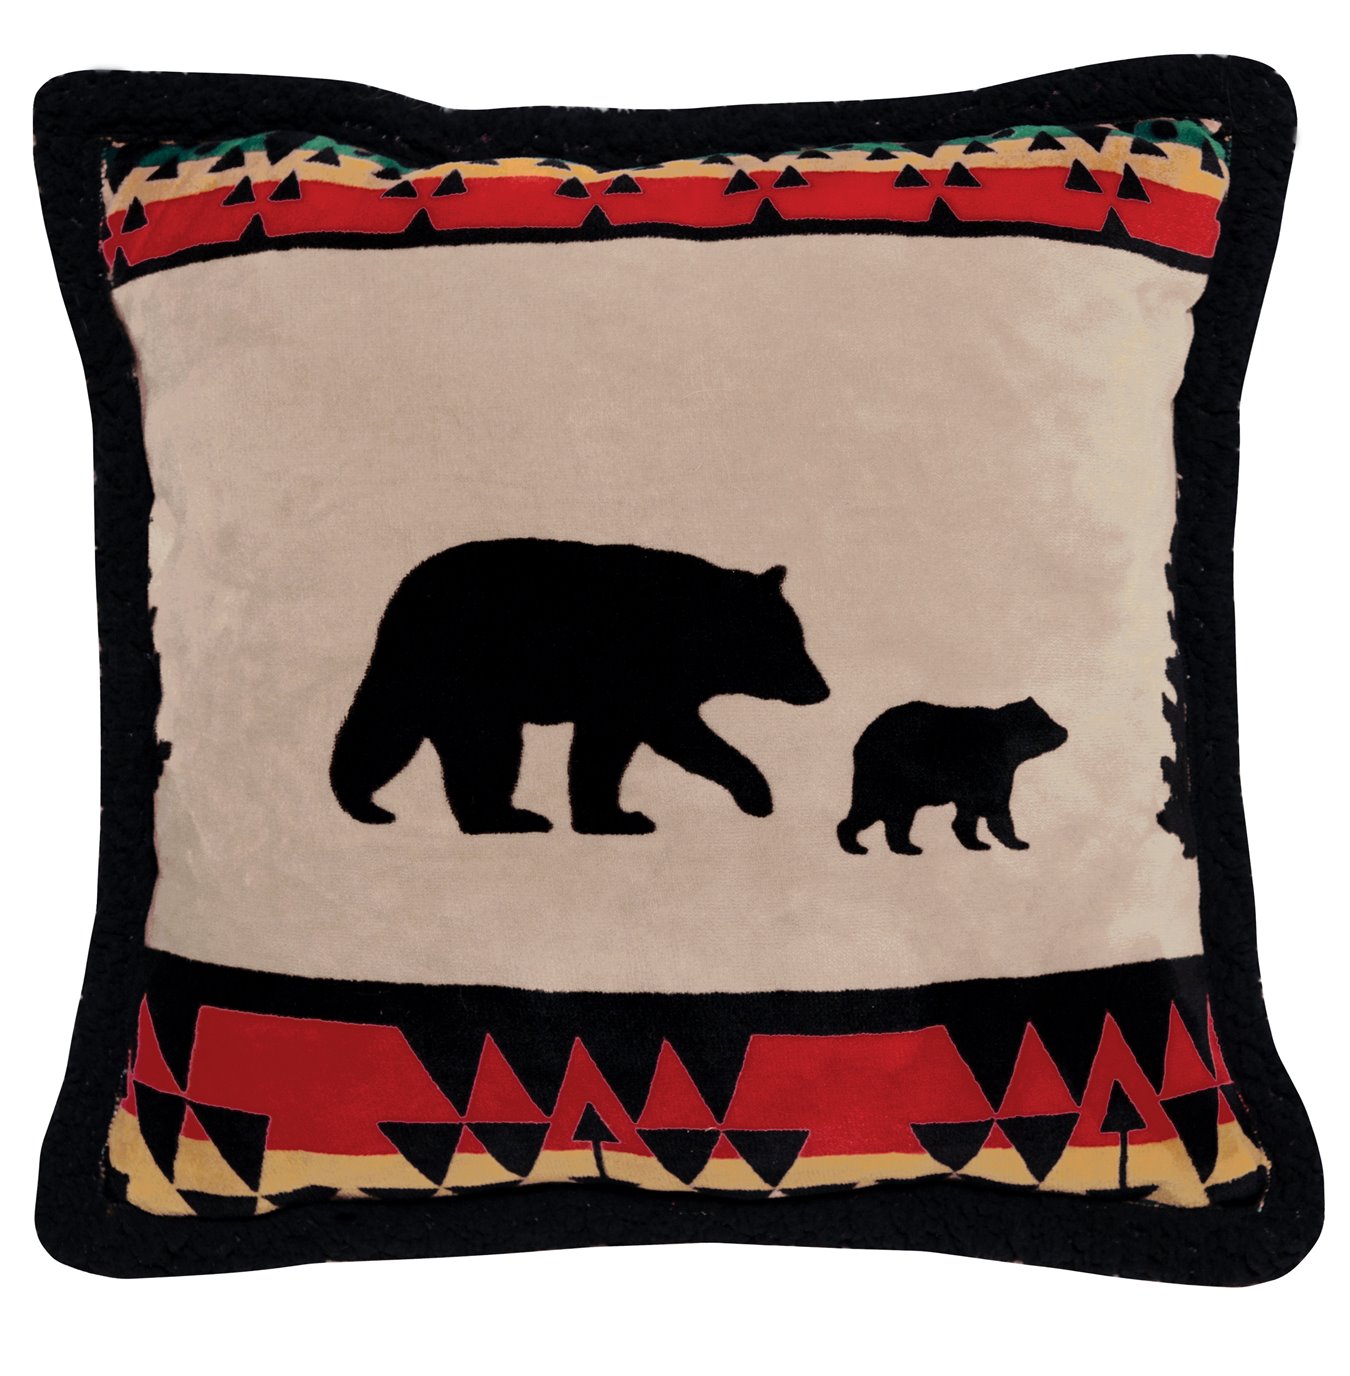 Bear Trail with Black Sherpa pillow